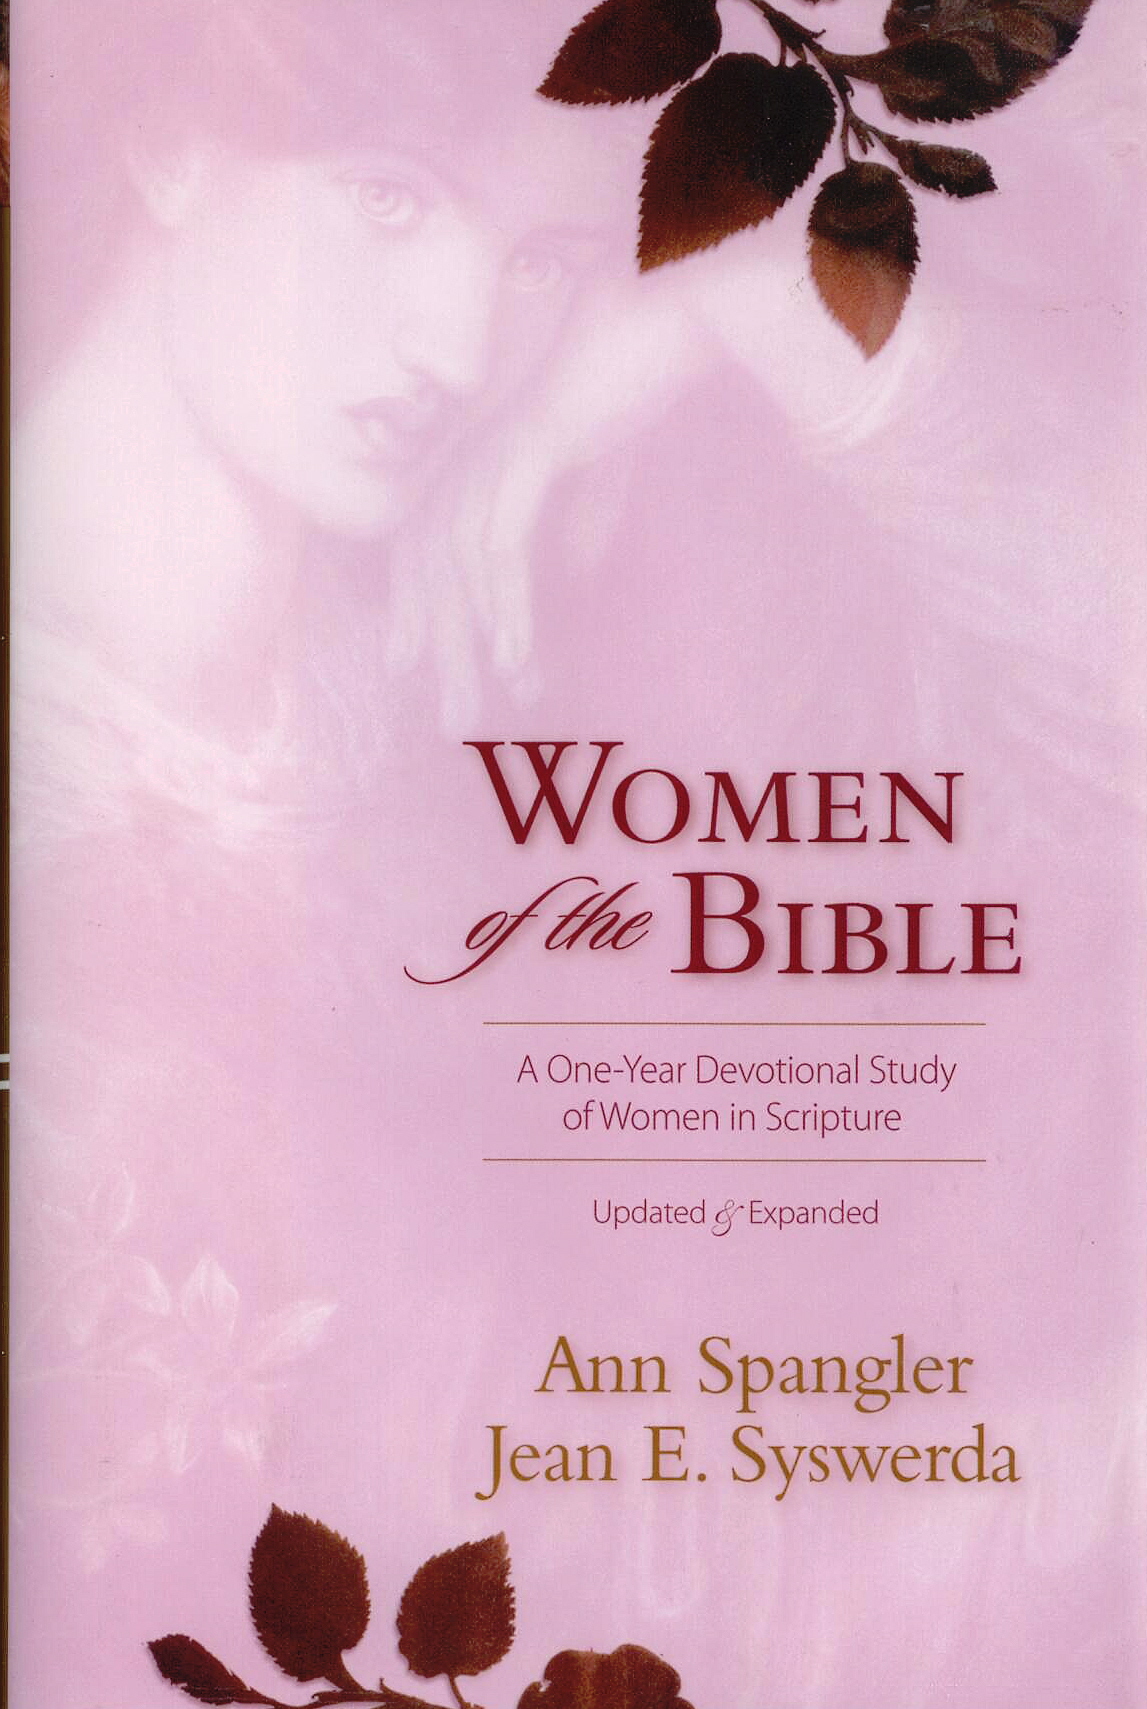 Women of The Bible by Ann Spangler